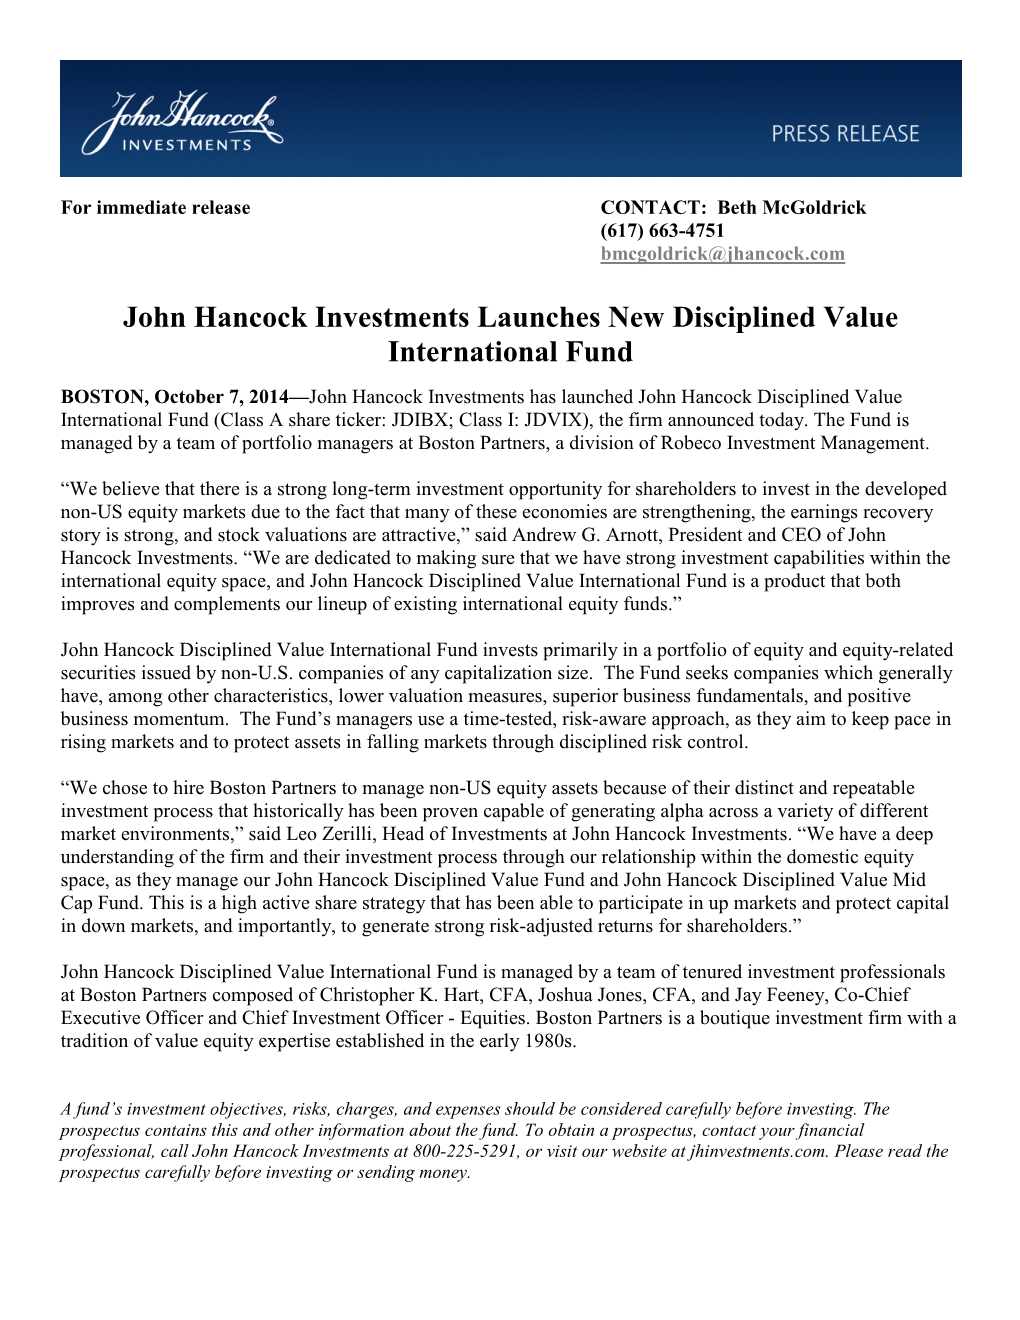 John Hancock Investments Launches New Disciplined Value International Fund